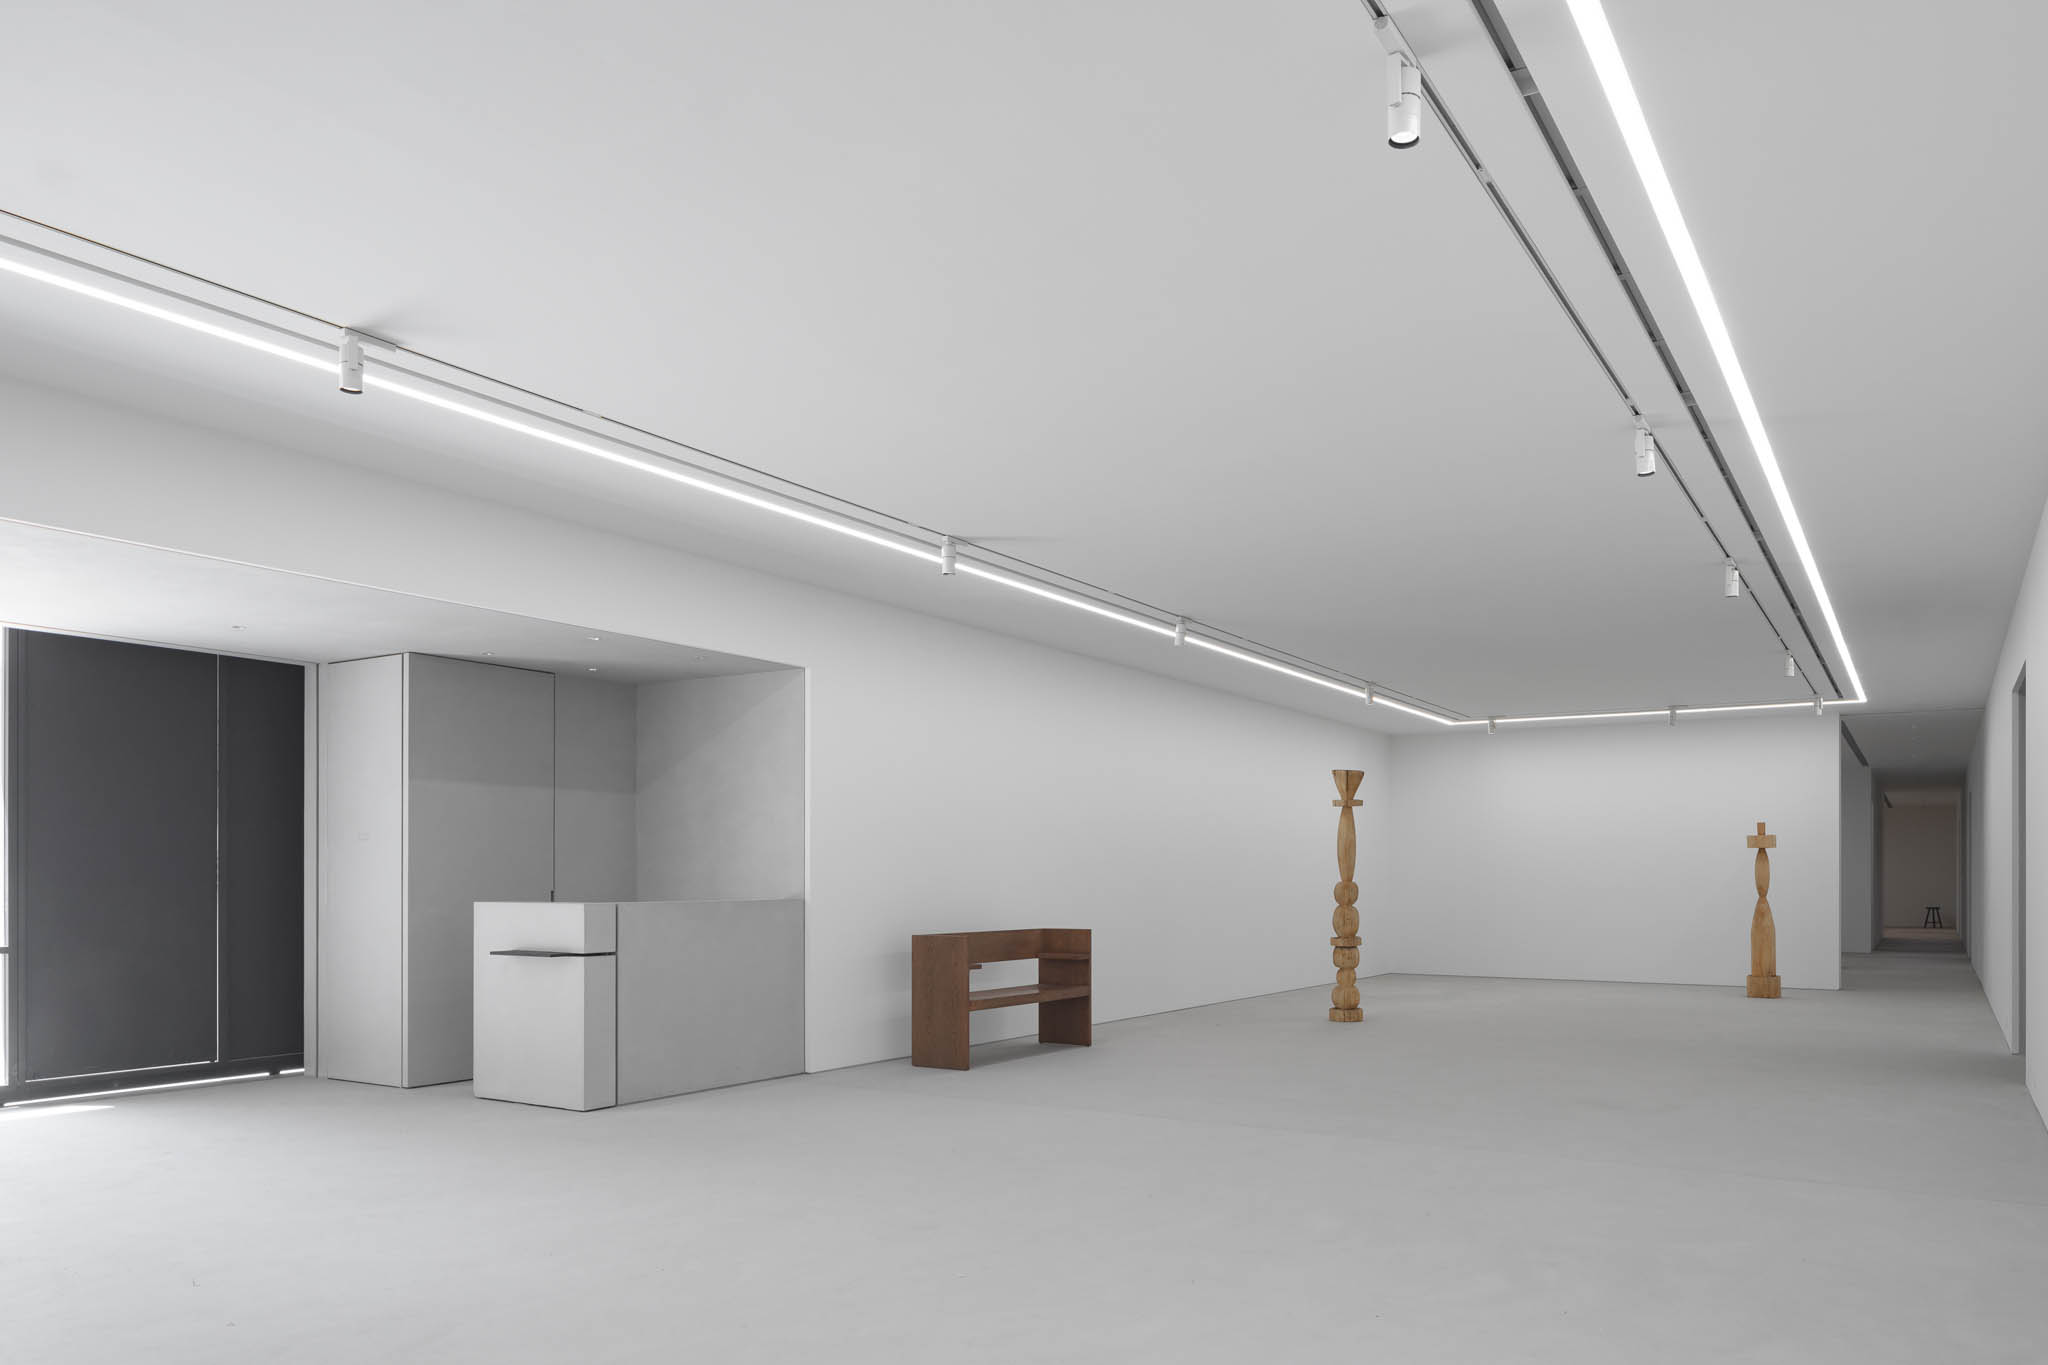 The minimalist gallery space